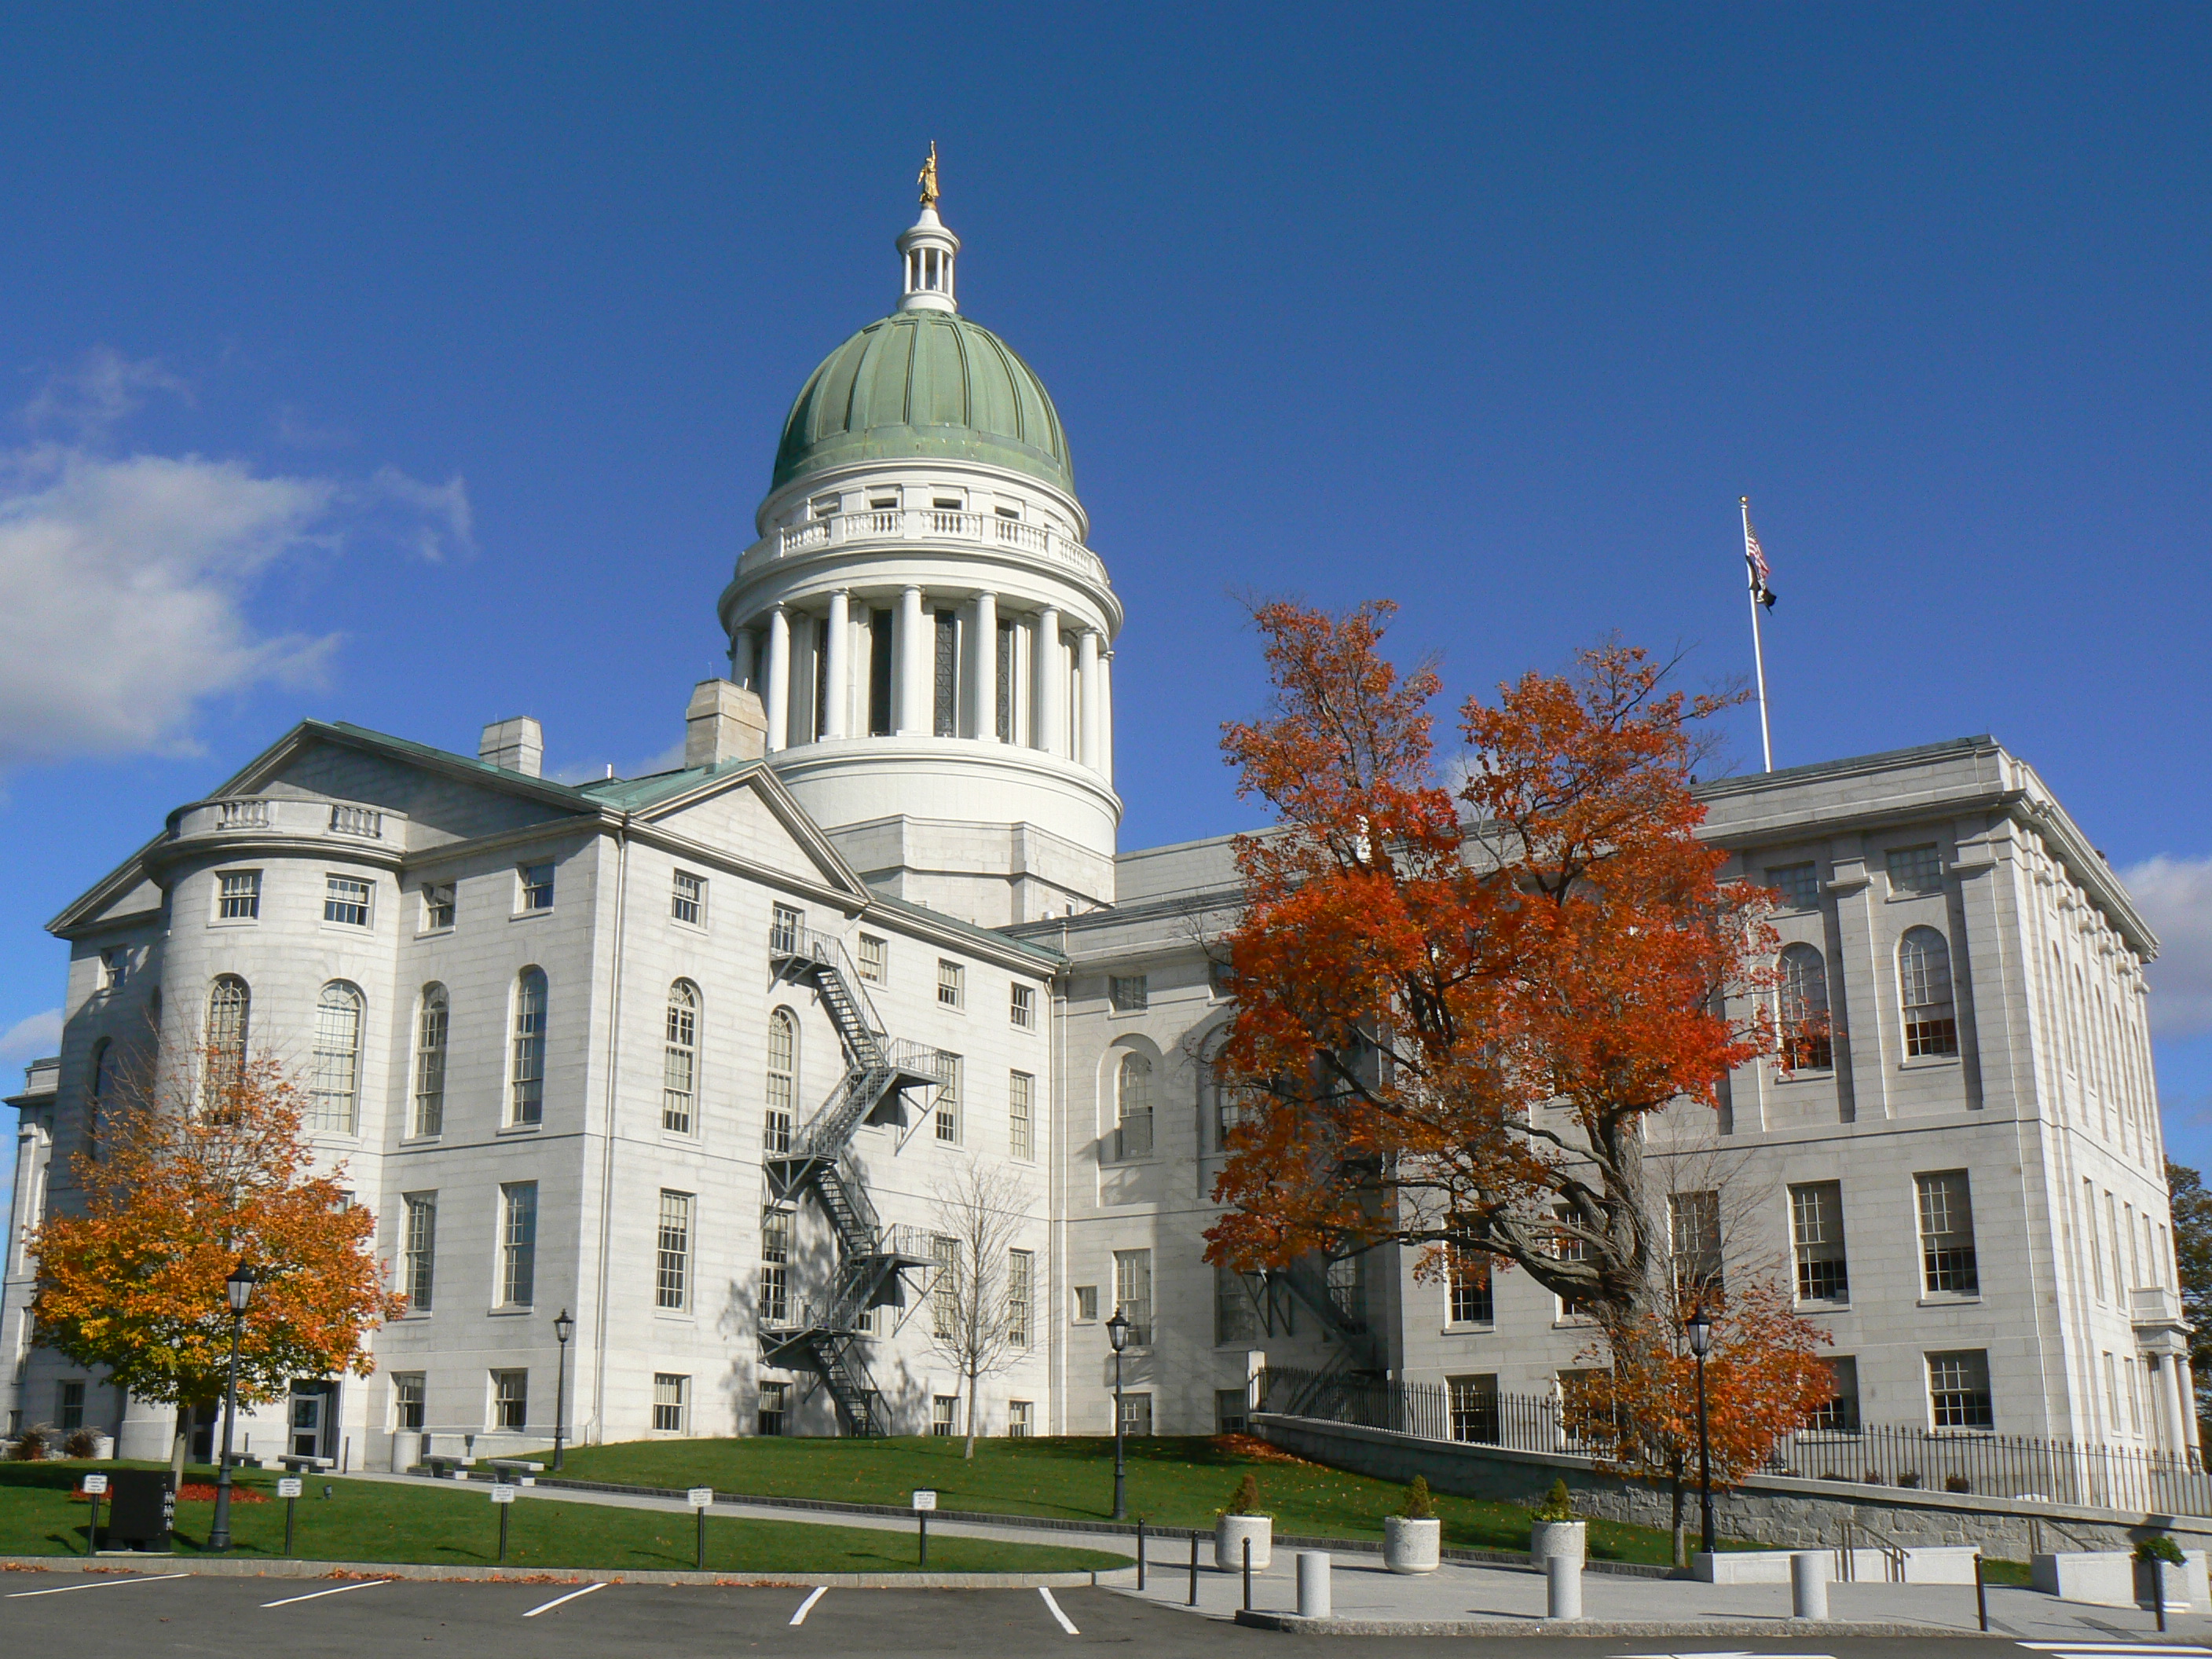 Maine Capitol Building | Pics4Learning